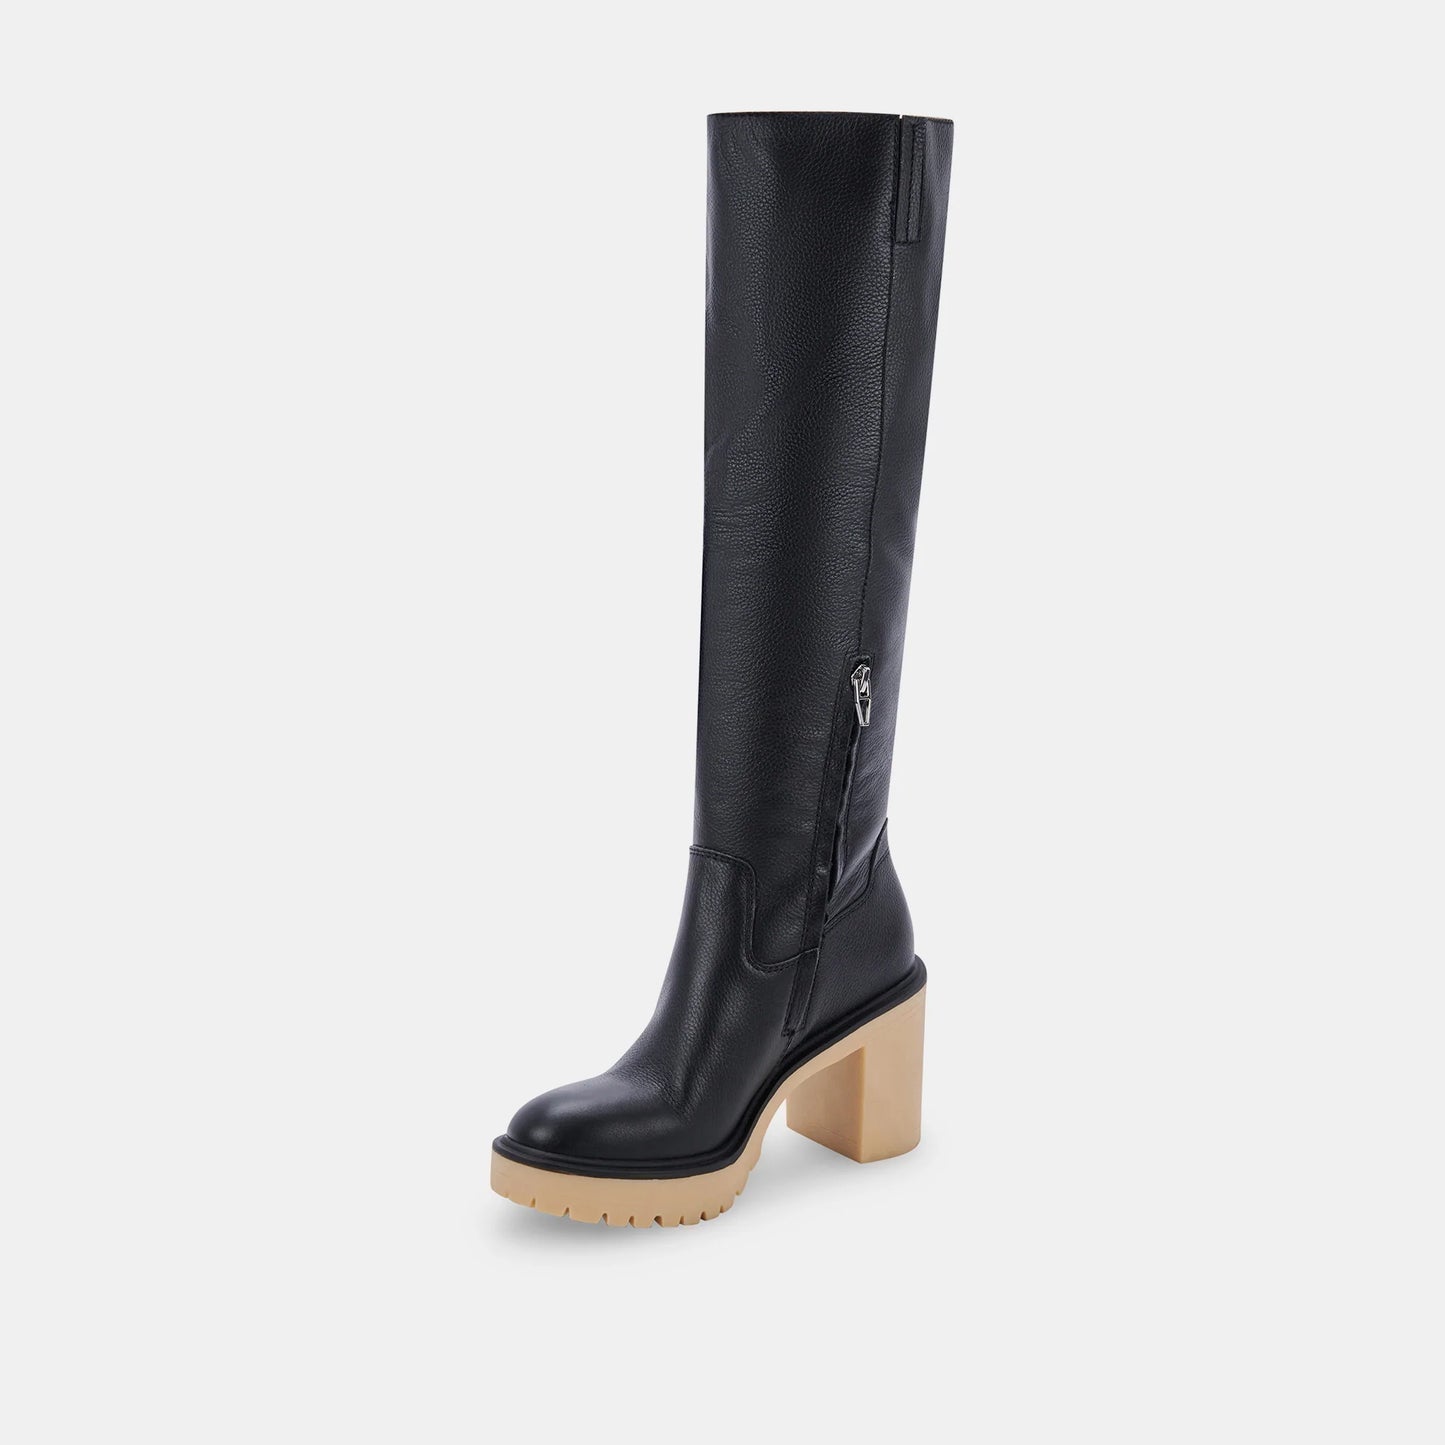 Load image into Gallery viewer, dolce vita knee high boots
